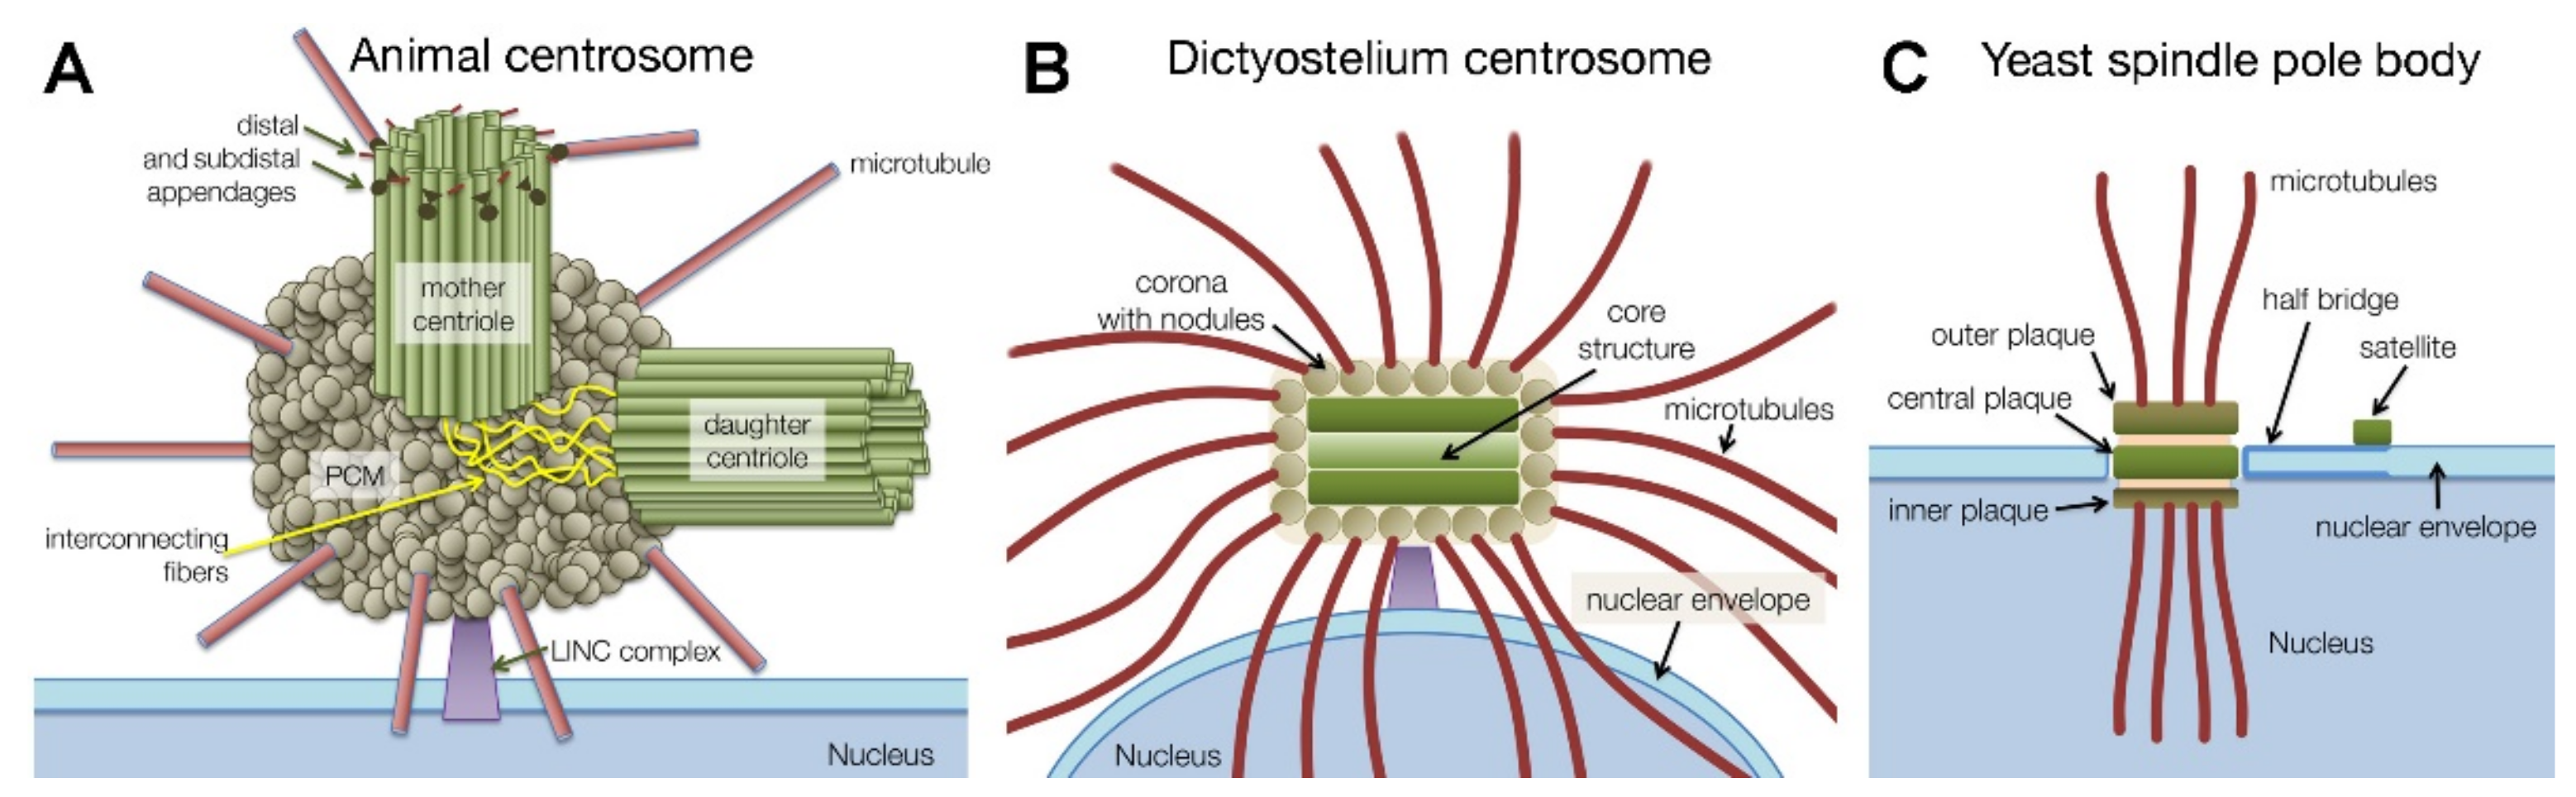 Cells | Free Full-Text | The Dictyostelium Centrosome